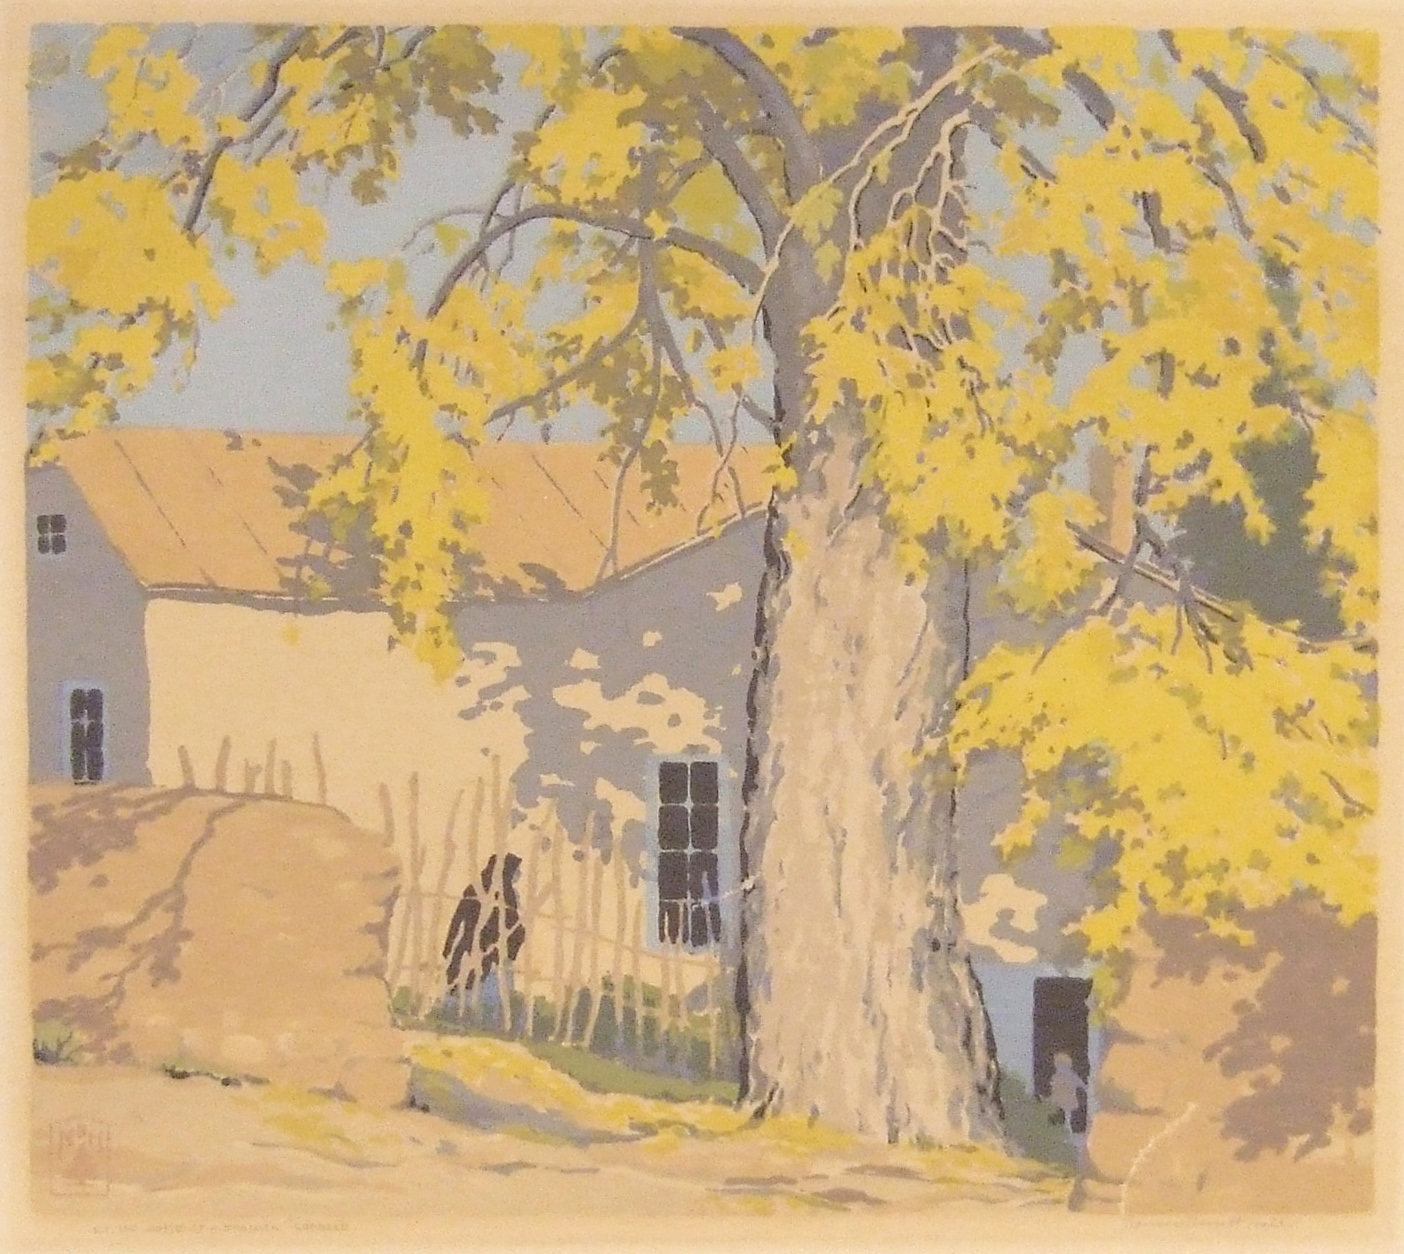 Norma Bassett Hall, “Home of a Spanish Cobbler”, serigraph